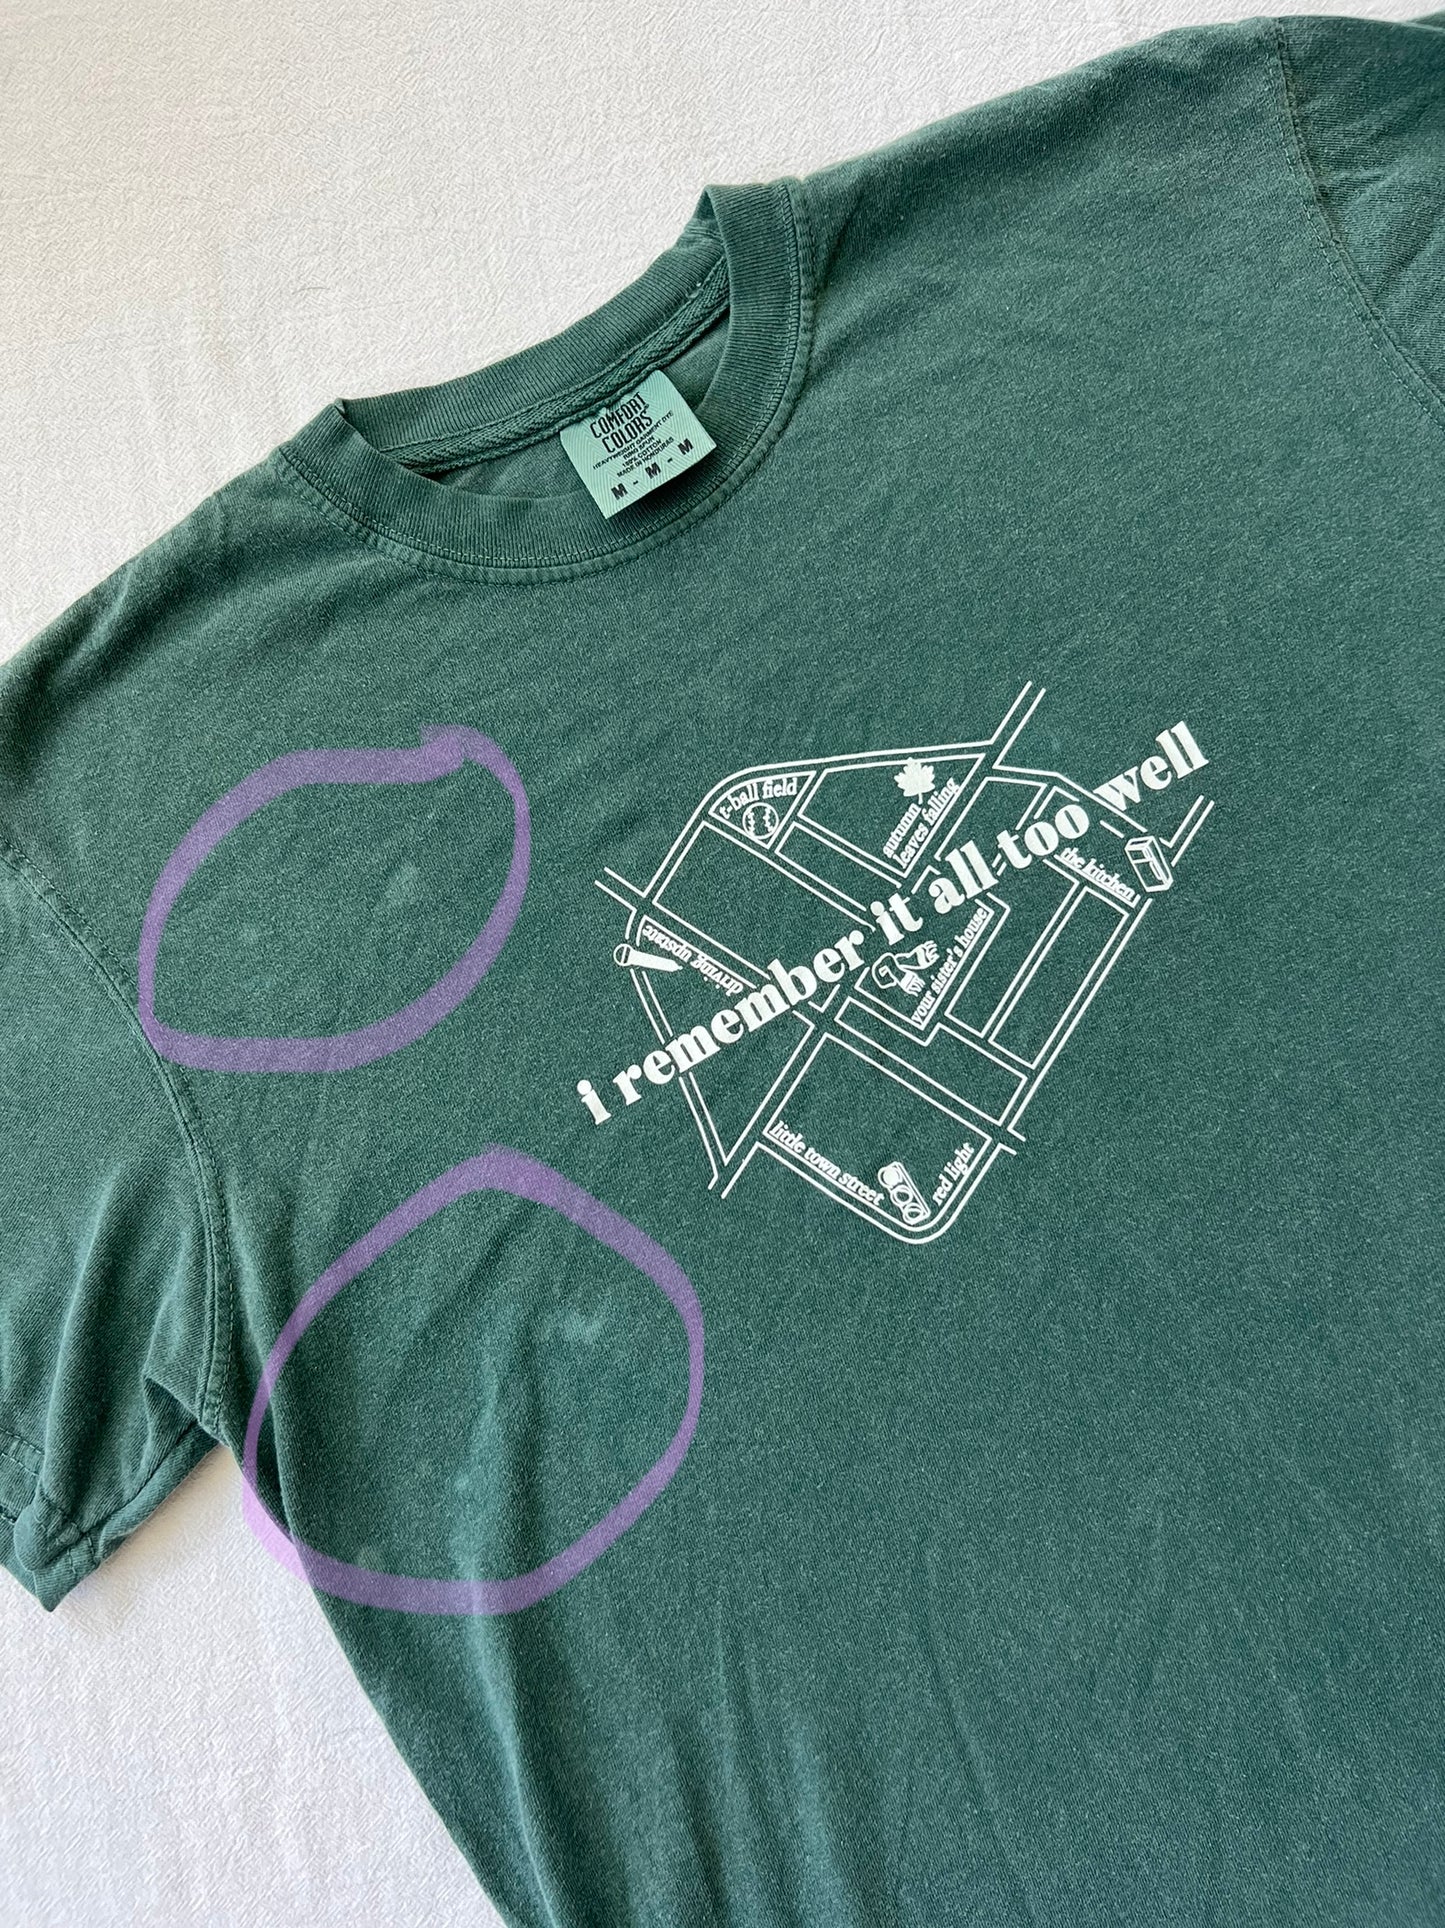 ATW Map It Out Tee: Size M, Spruce (OOPSIE SHIRT)